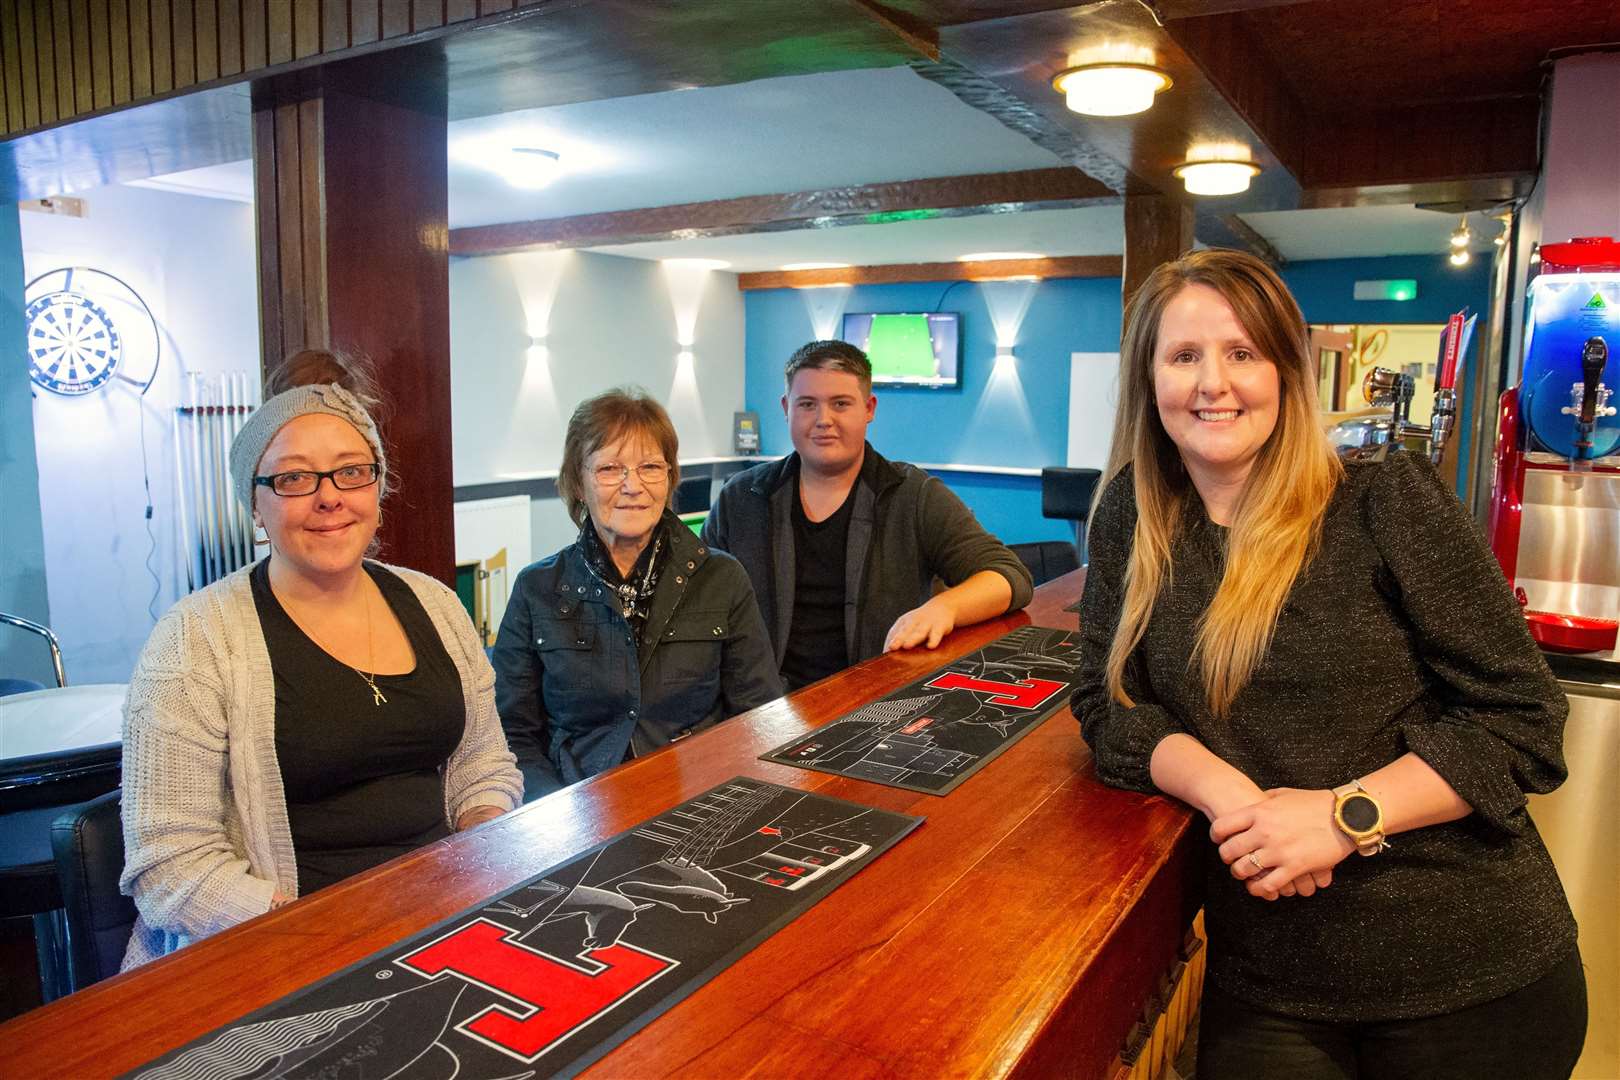 From left; Melissa Cliff, Mabel Sinclair, Daniel Wall and Denise Morrison. The Red Lion Tavern in Fochabers opened up their rooms for free for people trapped by Storm Arwen and helped locals without electricity. Picture: Daniel Forsyth.